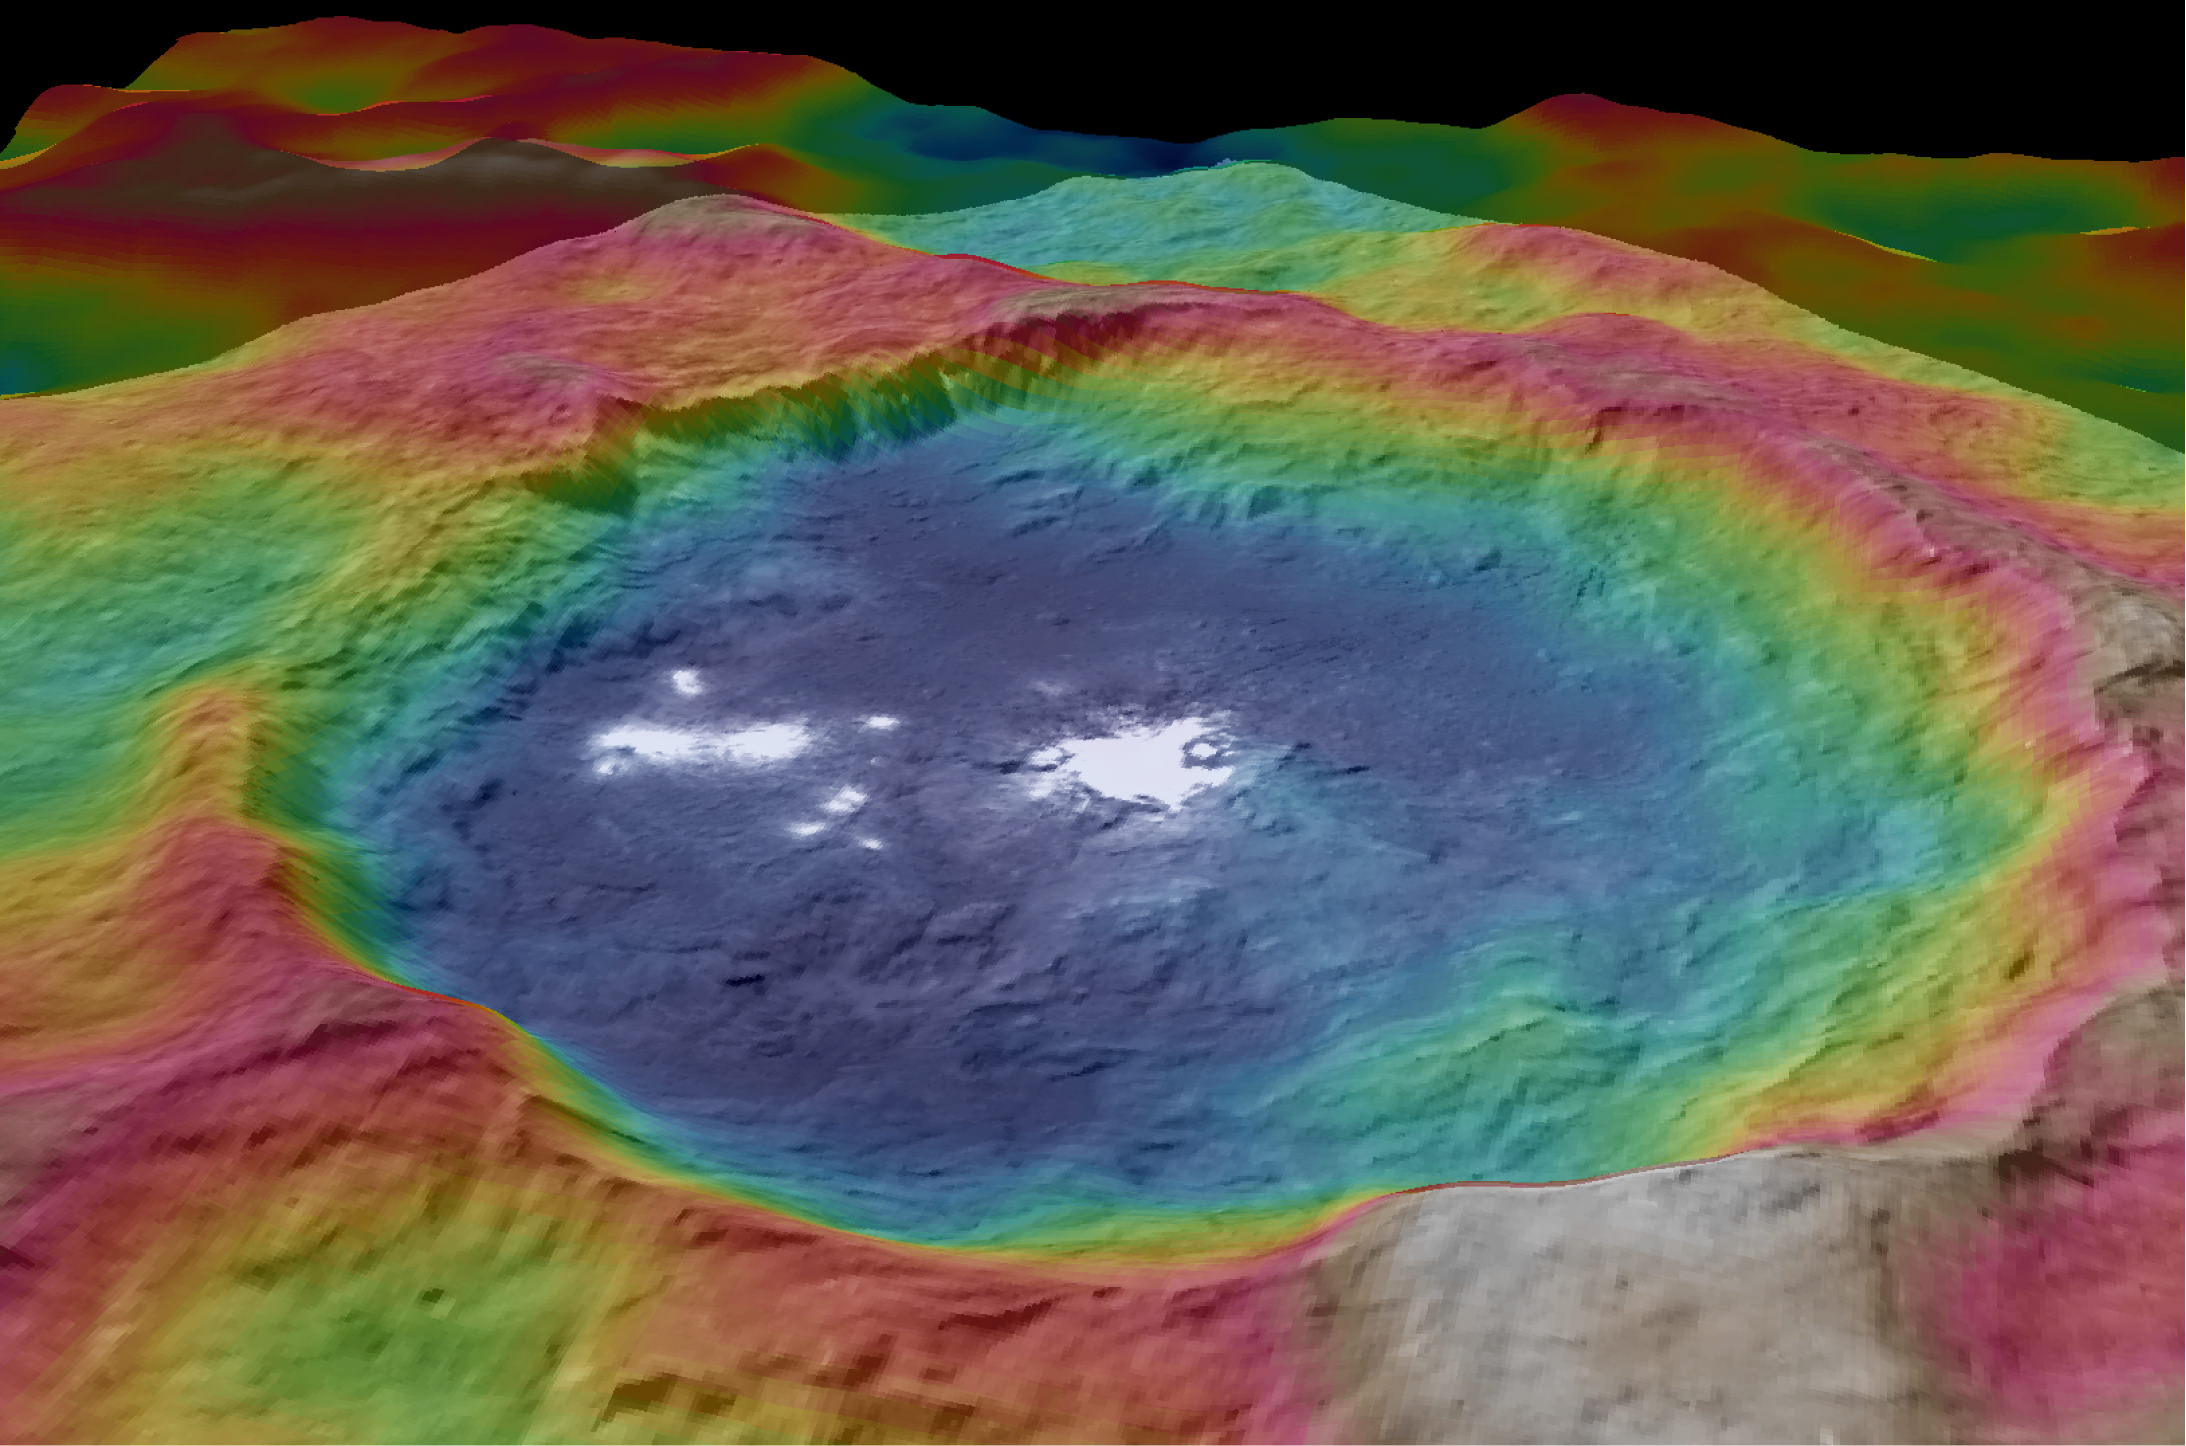 This view from NASA's Dawn spacecraft is a color-coded topographic map of Occator crater on Ceres. Blue is the lowest elevation, and brown is the highest. The crater, which is home to the brightest spots on Ceres, is approximately 56 miles (90 kilometers wide).  Credits: NASA/JPL-Caltech/UCLA/MPS/DLR/IDA